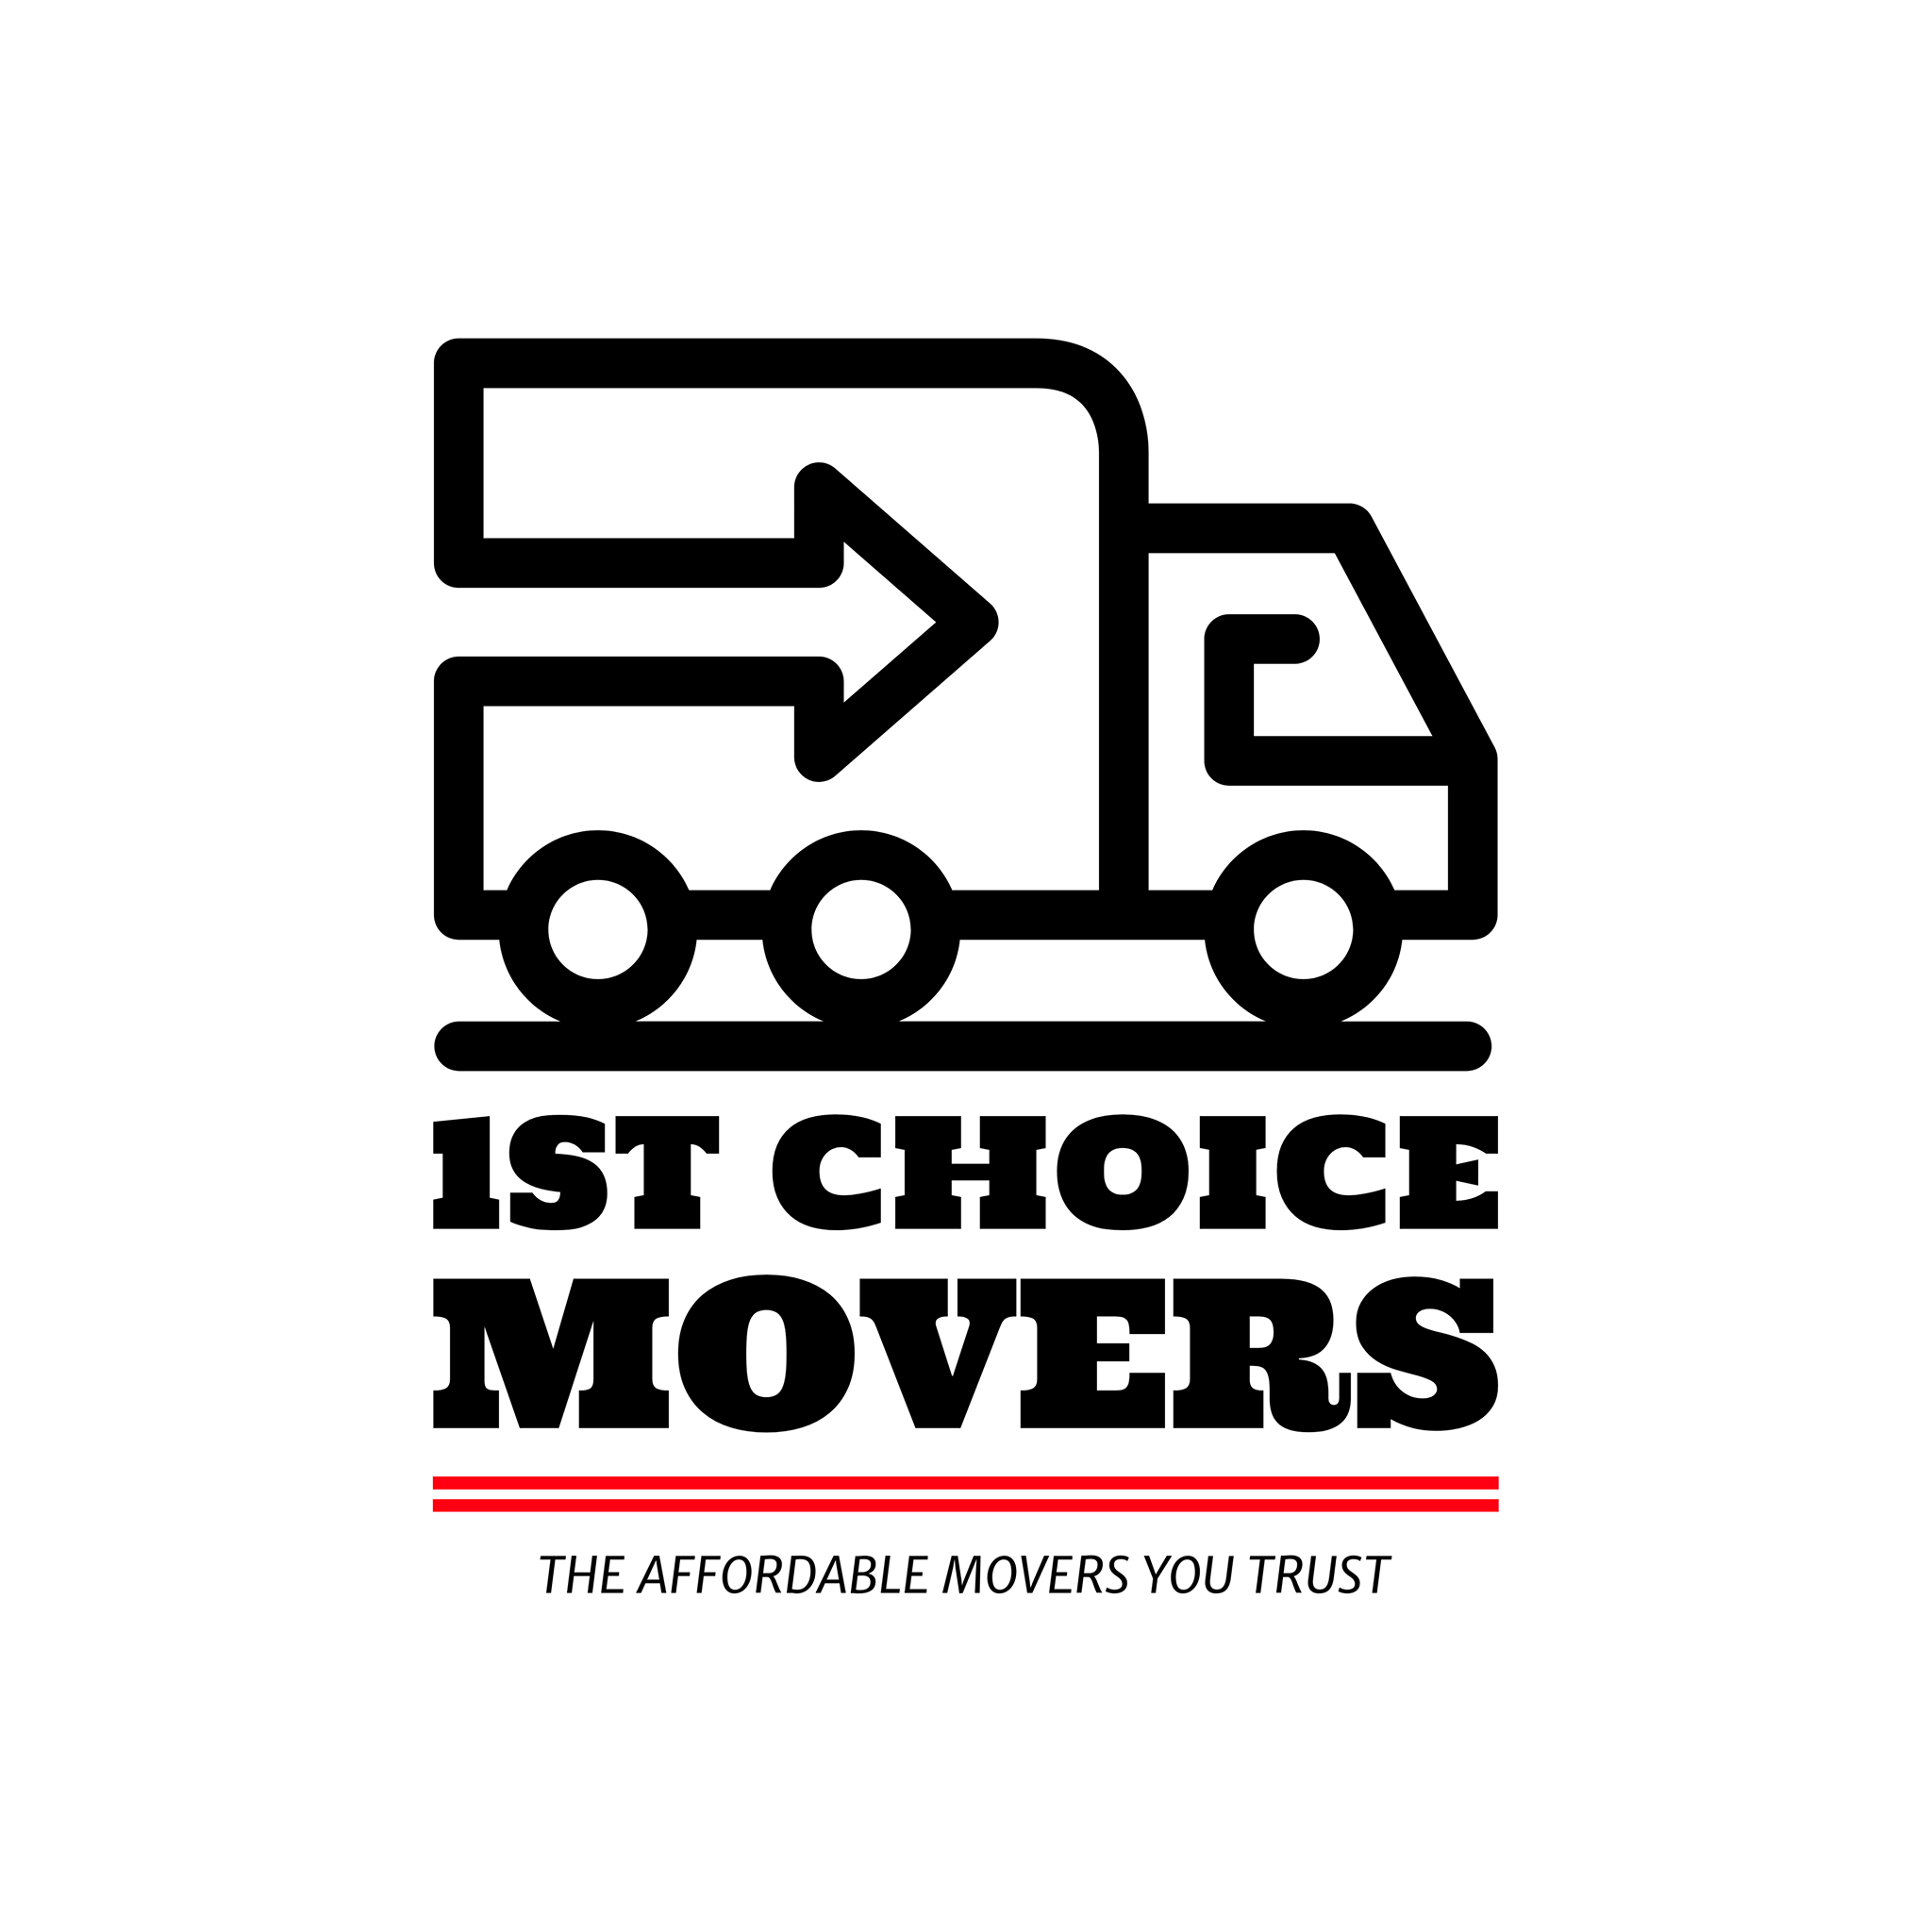 1st choice movers